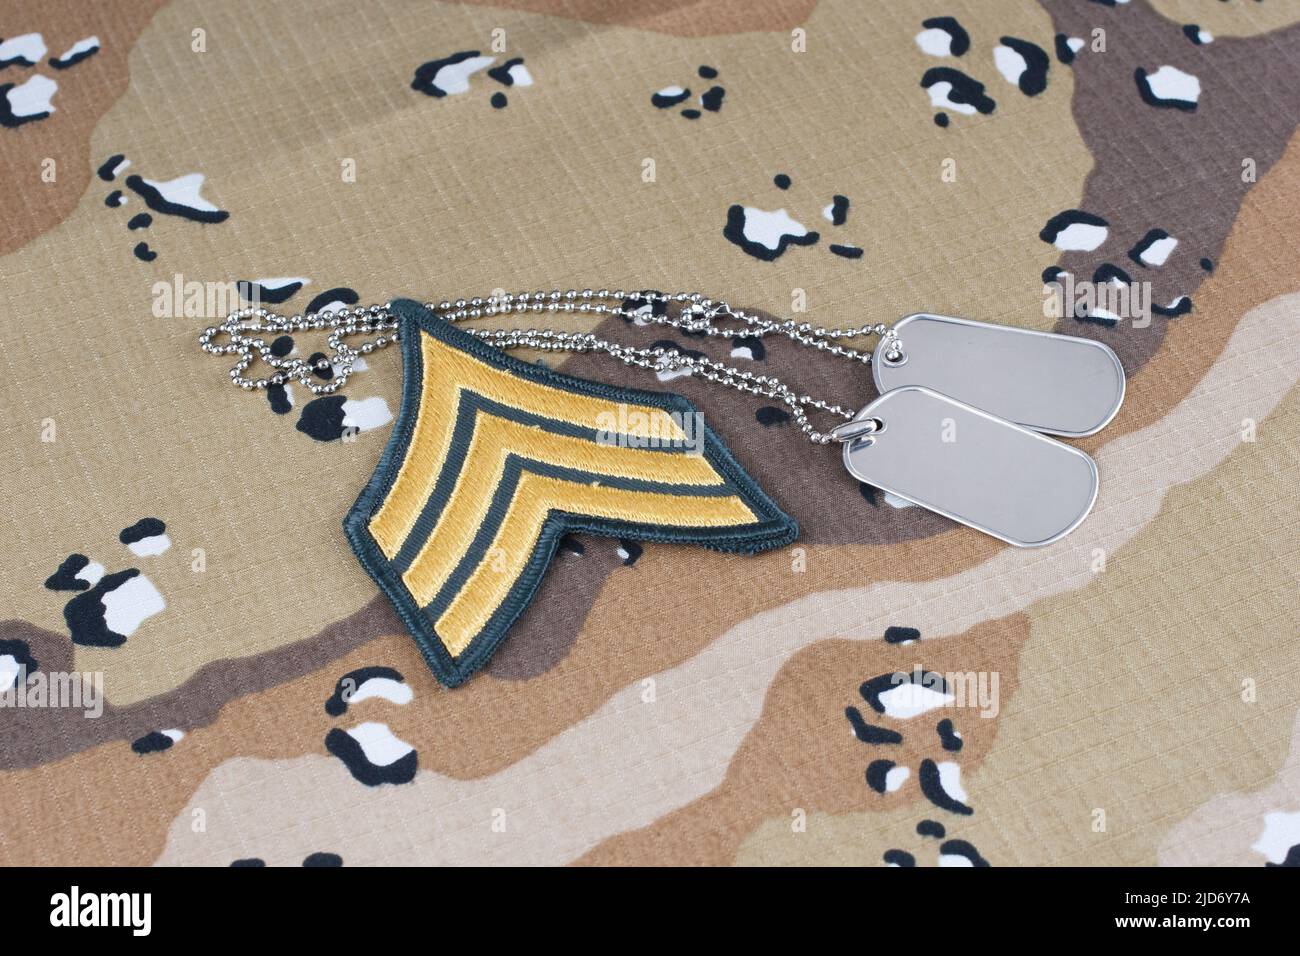 May 12, 2018. US ARMY Sergeant rank patch and dog tags on Desert Battle Dress Uniform Stock Photo